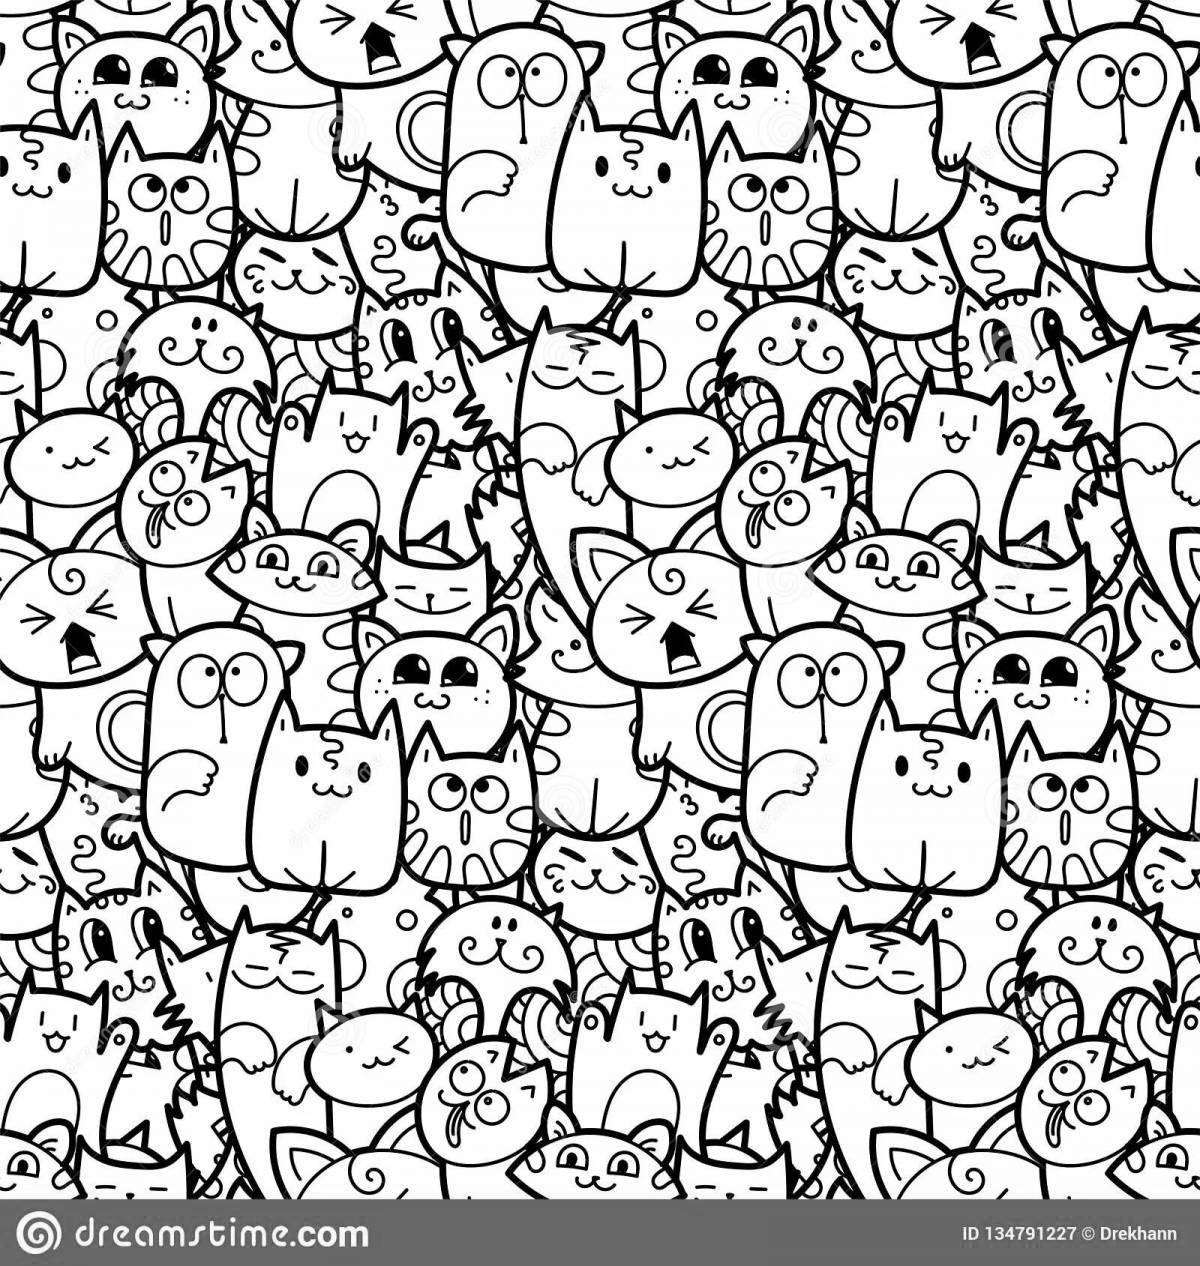 Playful many cats on one page